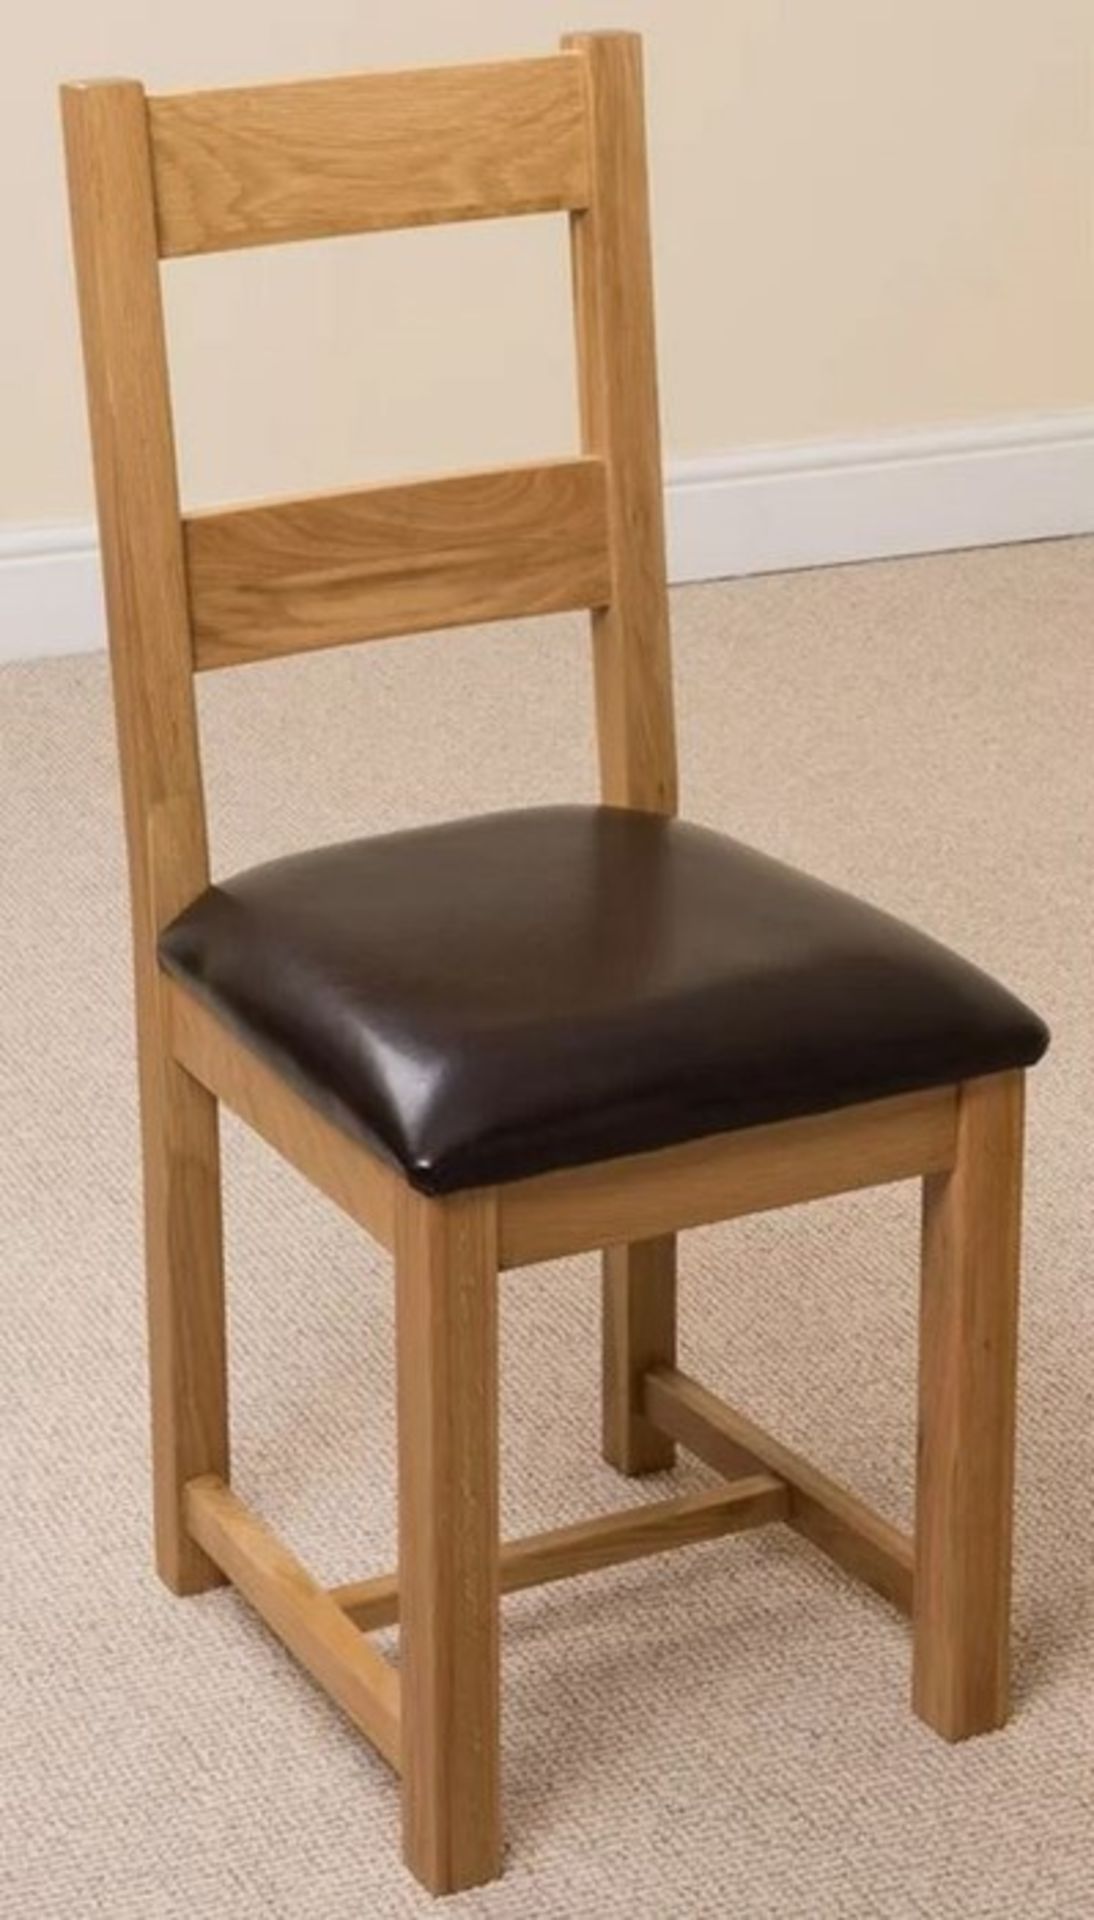 SOLID WOOD UPHOLSTERED DINING CHAIR IN LIGHT OAK